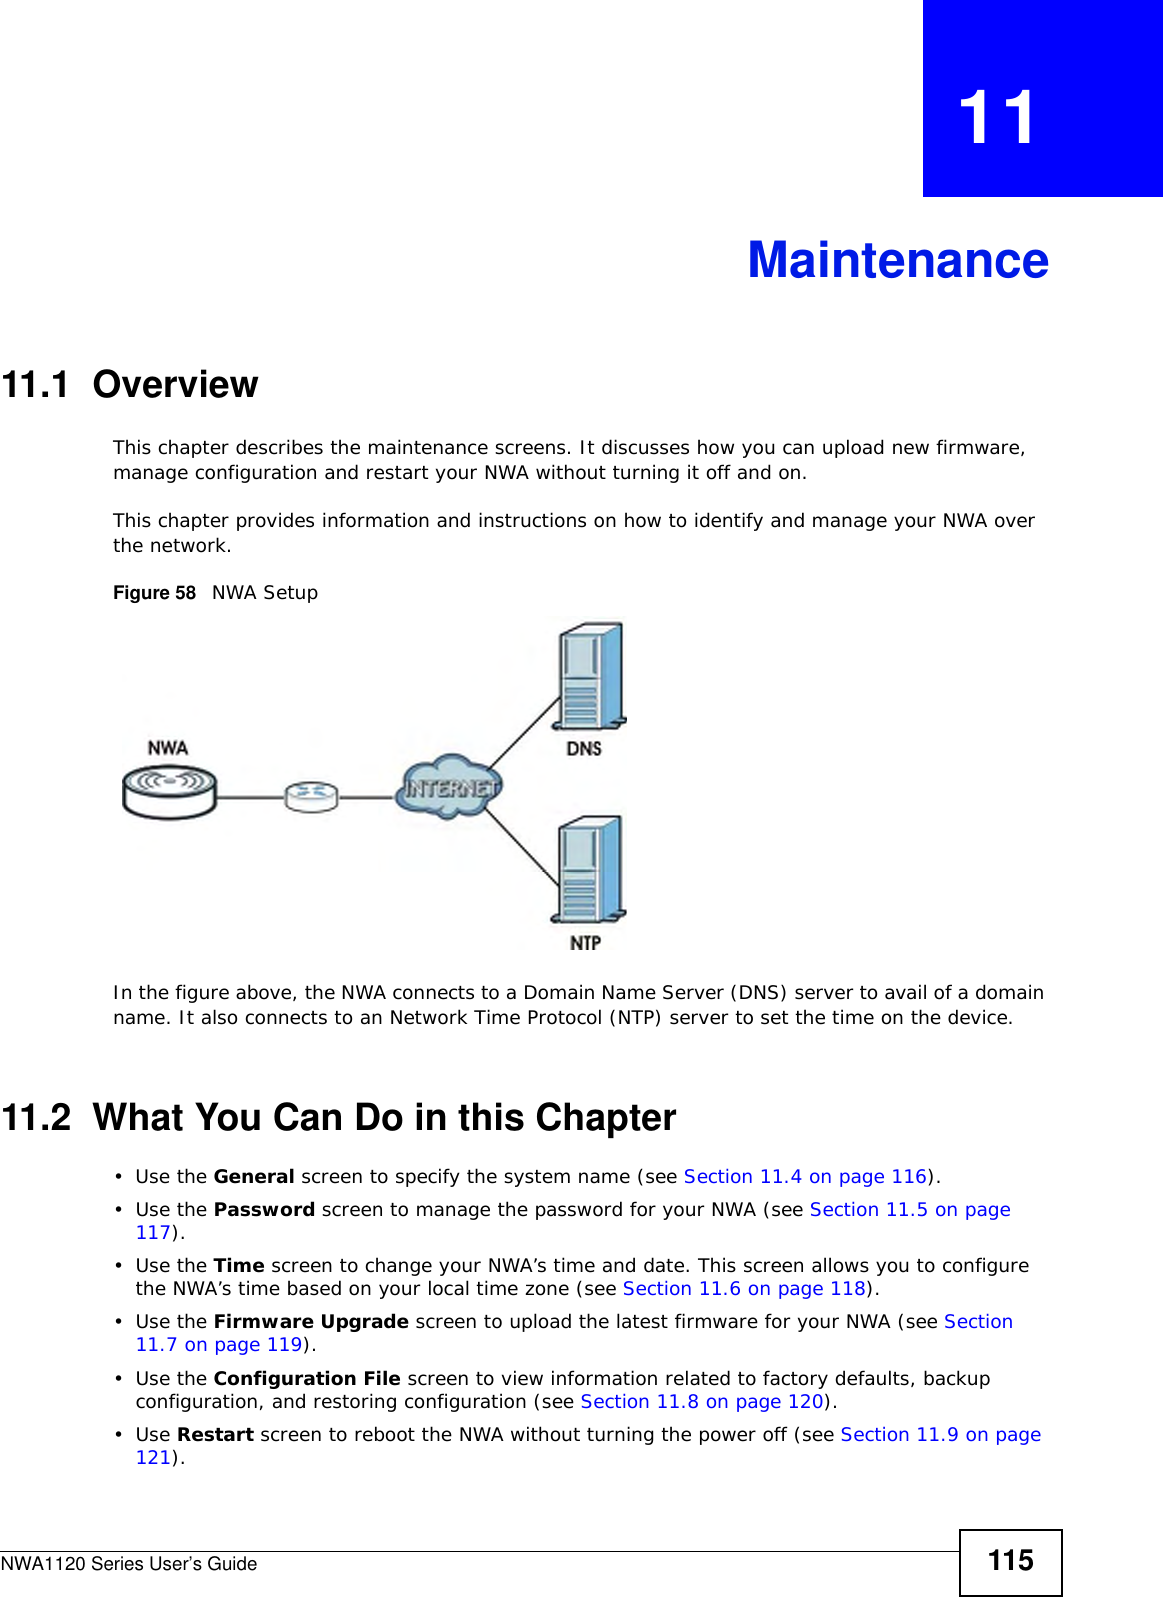 NWA1120 Series User’s Guide 115CHAPTER   11Maintenance11.1  OverviewThis chapter describes the maintenance screens. It discusses how you can upload new firmware, manage configuration and restart your NWA without turning it off and on. This chapter provides information and instructions on how to identify and manage your NWA over the network. Figure 58   NWA Setup In the figure above, the NWA connects to a Domain Name Server (DNS) server to avail of a domain name. It also connects to an Network Time Protocol (NTP) server to set the time on the device.11.2  What You Can Do in this Chapter•Use the General screen to specify the system name (see Section 11.4 on page 116).•Use the Password screen to manage the password for your NWA (see Section 11.5 on page 117).•Use the Time screen to change your NWA’s time and date. This screen allows you to configure the NWA’s time based on your local time zone (see Section 11.6 on page 118).•Use the Firmware Upgrade screen to upload the latest firmware for your NWA (see Section 11.7 on page 119).•Use the Configuration File screen to view information related to factory defaults, backup configuration, and restoring configuration (see Section 11.8 on page 120).•Use Restart screen to reboot the NWA without turning the power off (see Section 11.9 on page 121). 